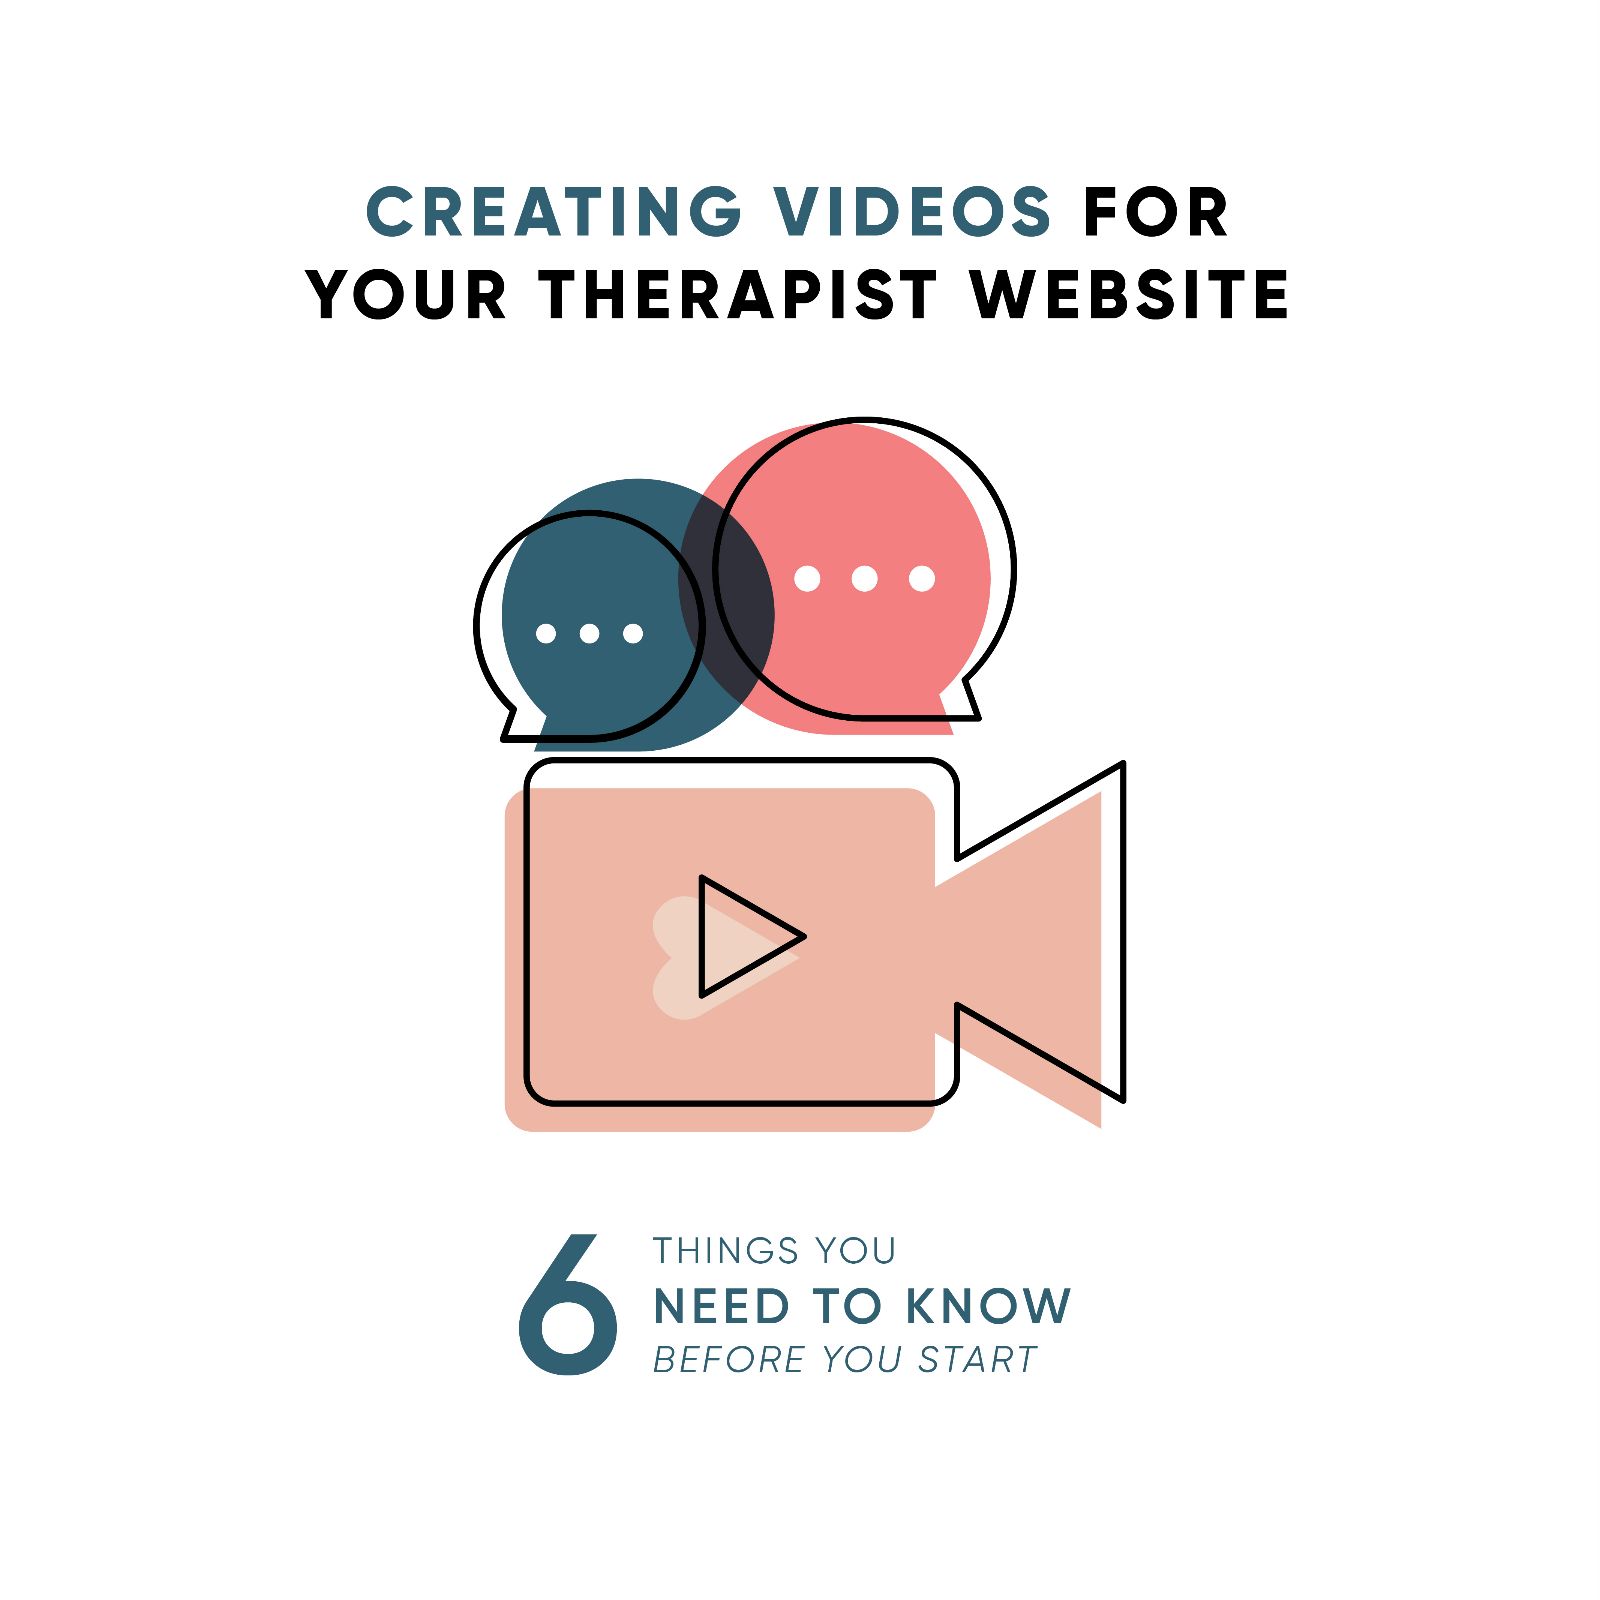 Creating Videos for your Therapist Website 6 things you NEED to know BEFORE you start